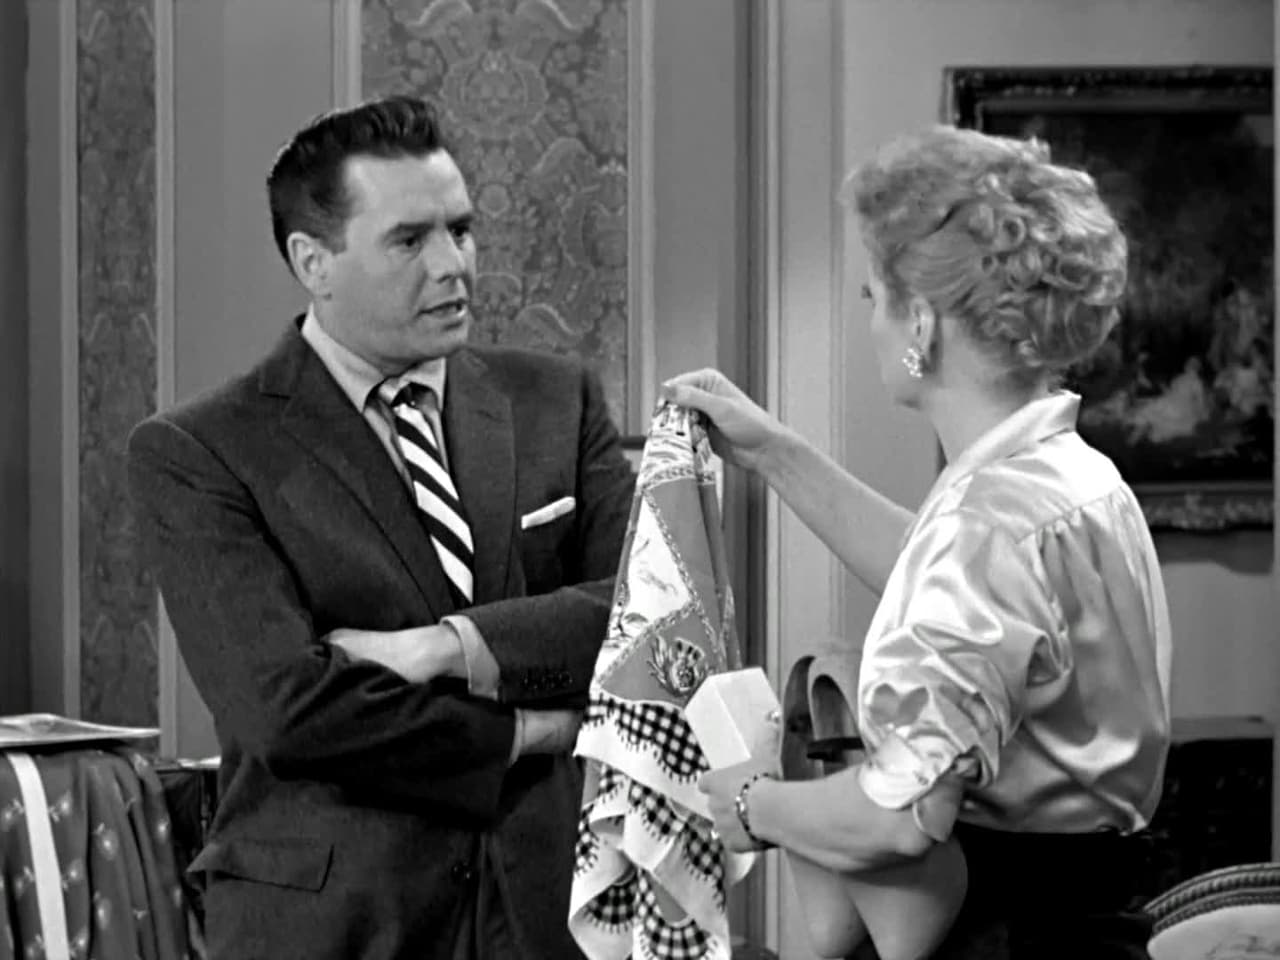 I Love Lucy - Season 5 Episode 26 : Return Home from Europe